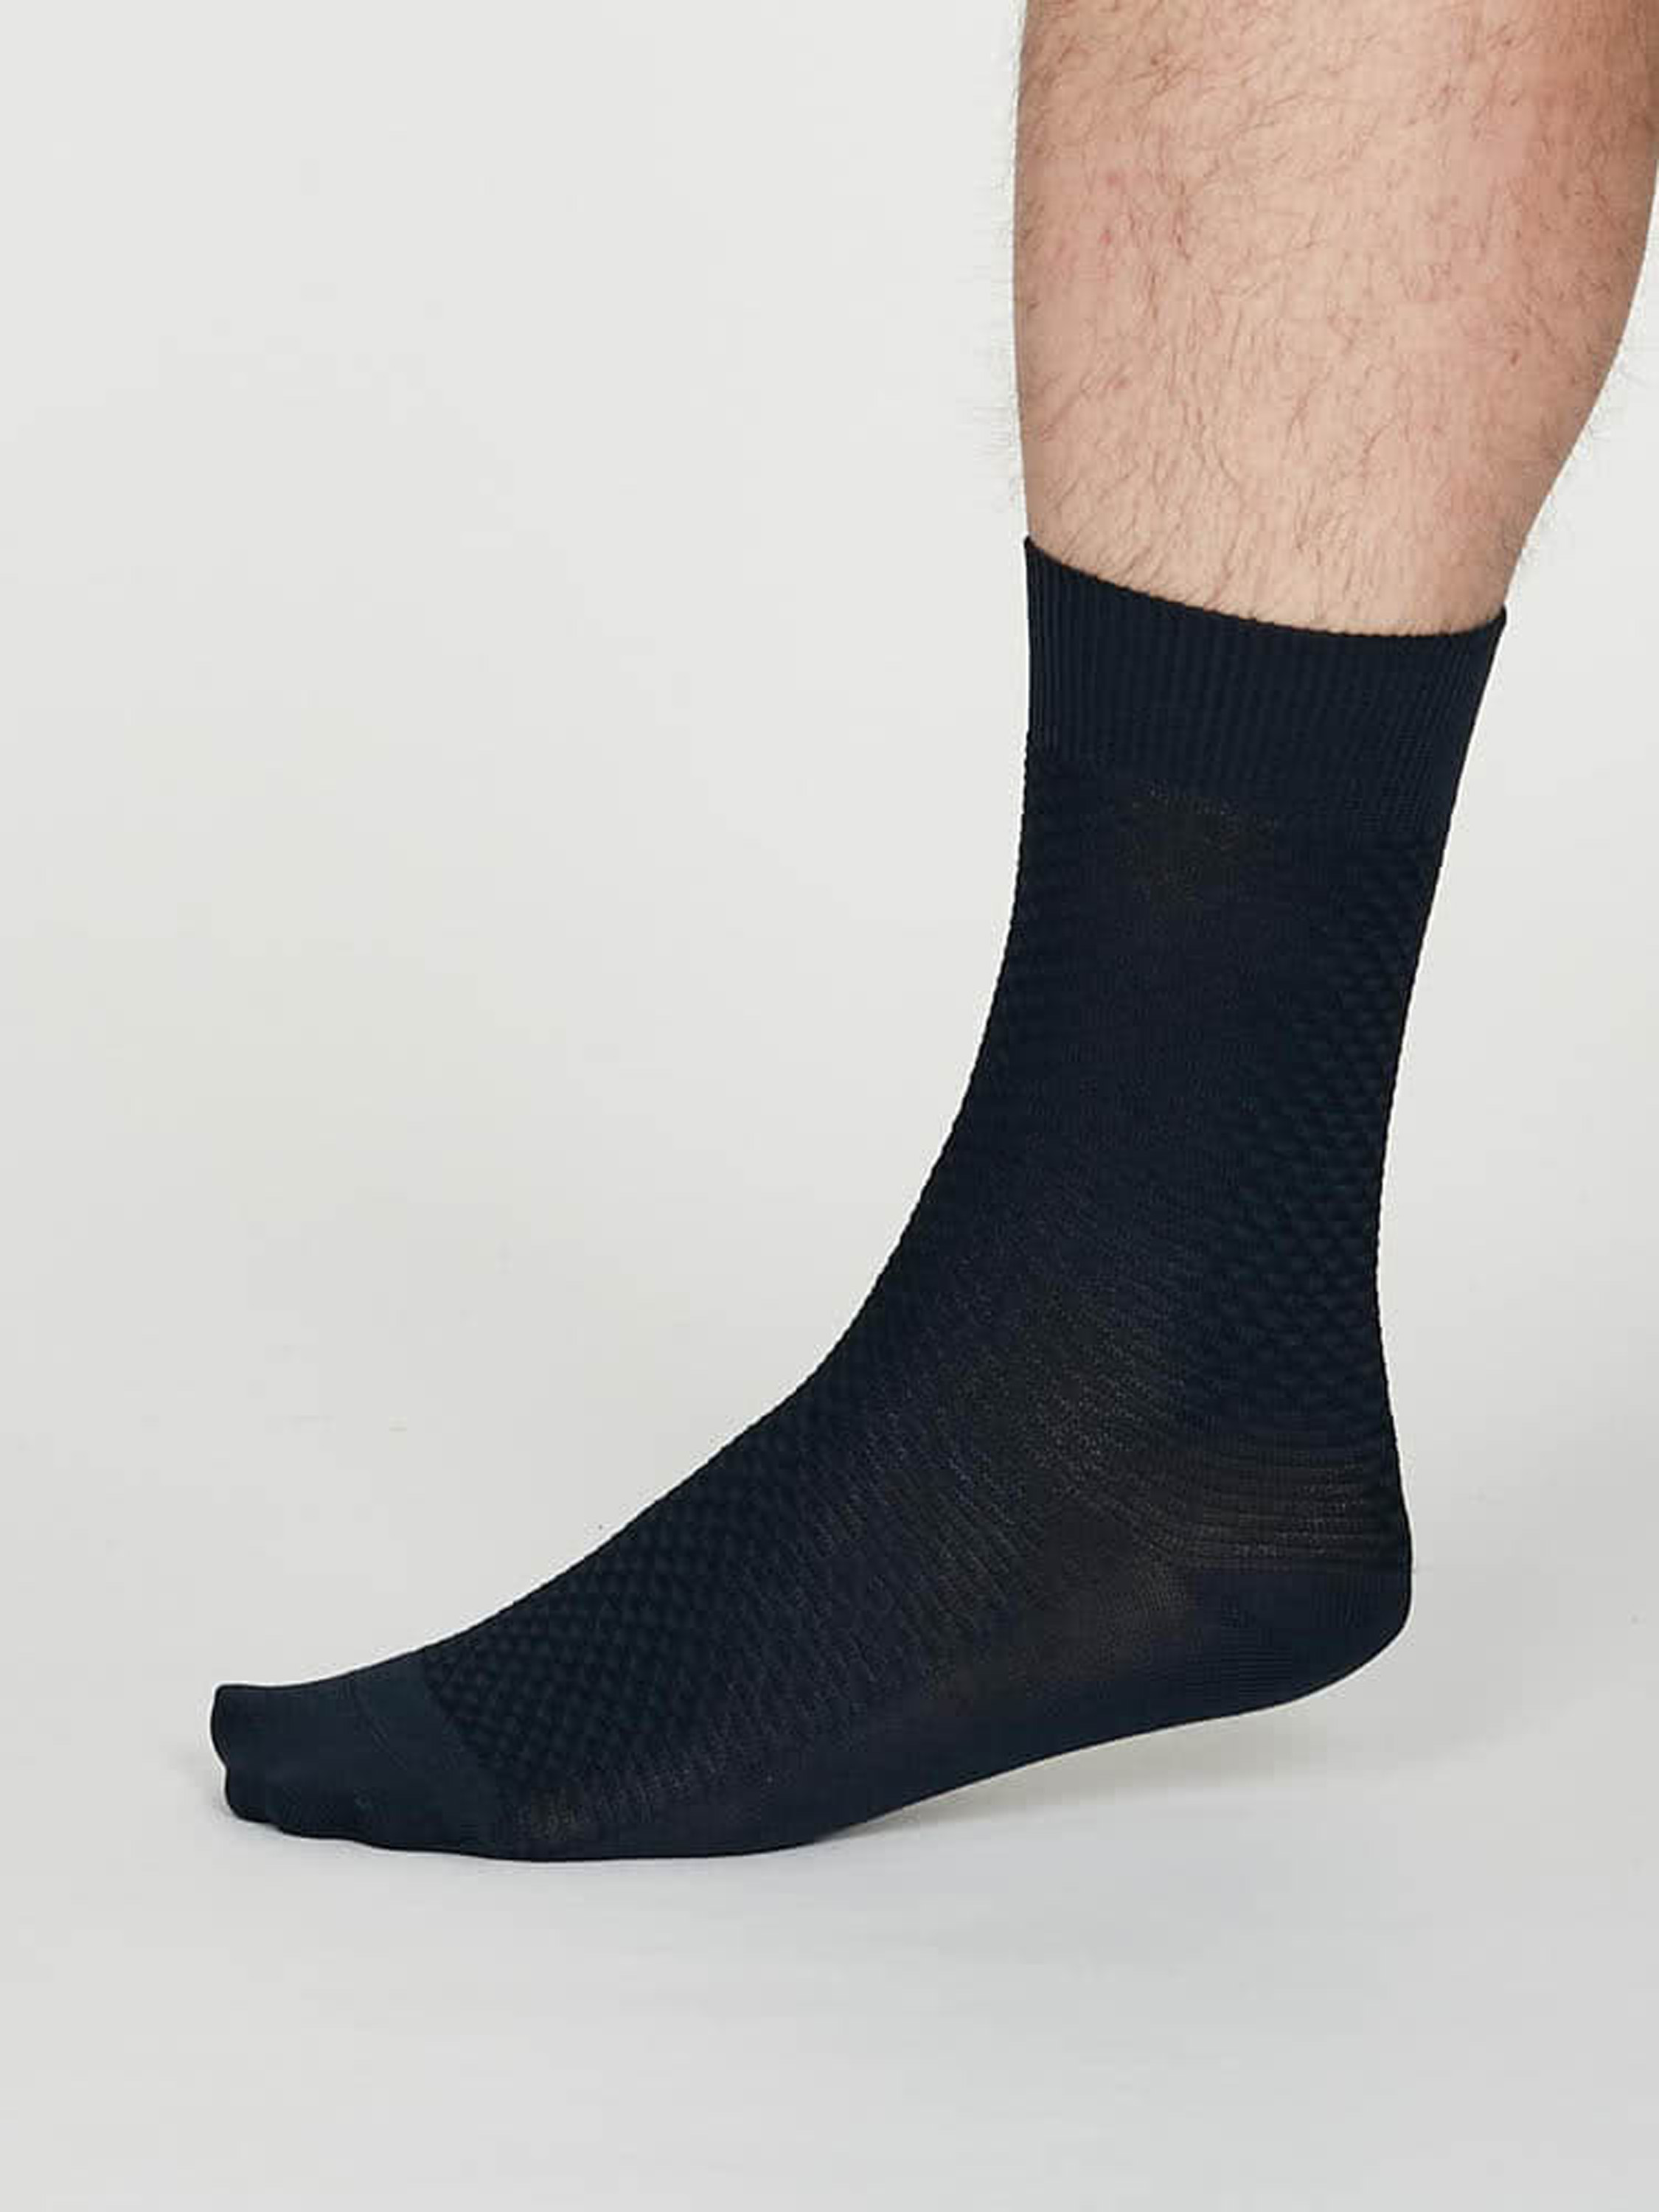 Geoffrey Organic Cotton Suit Socks by Thought ♥ Introducing Thoughts